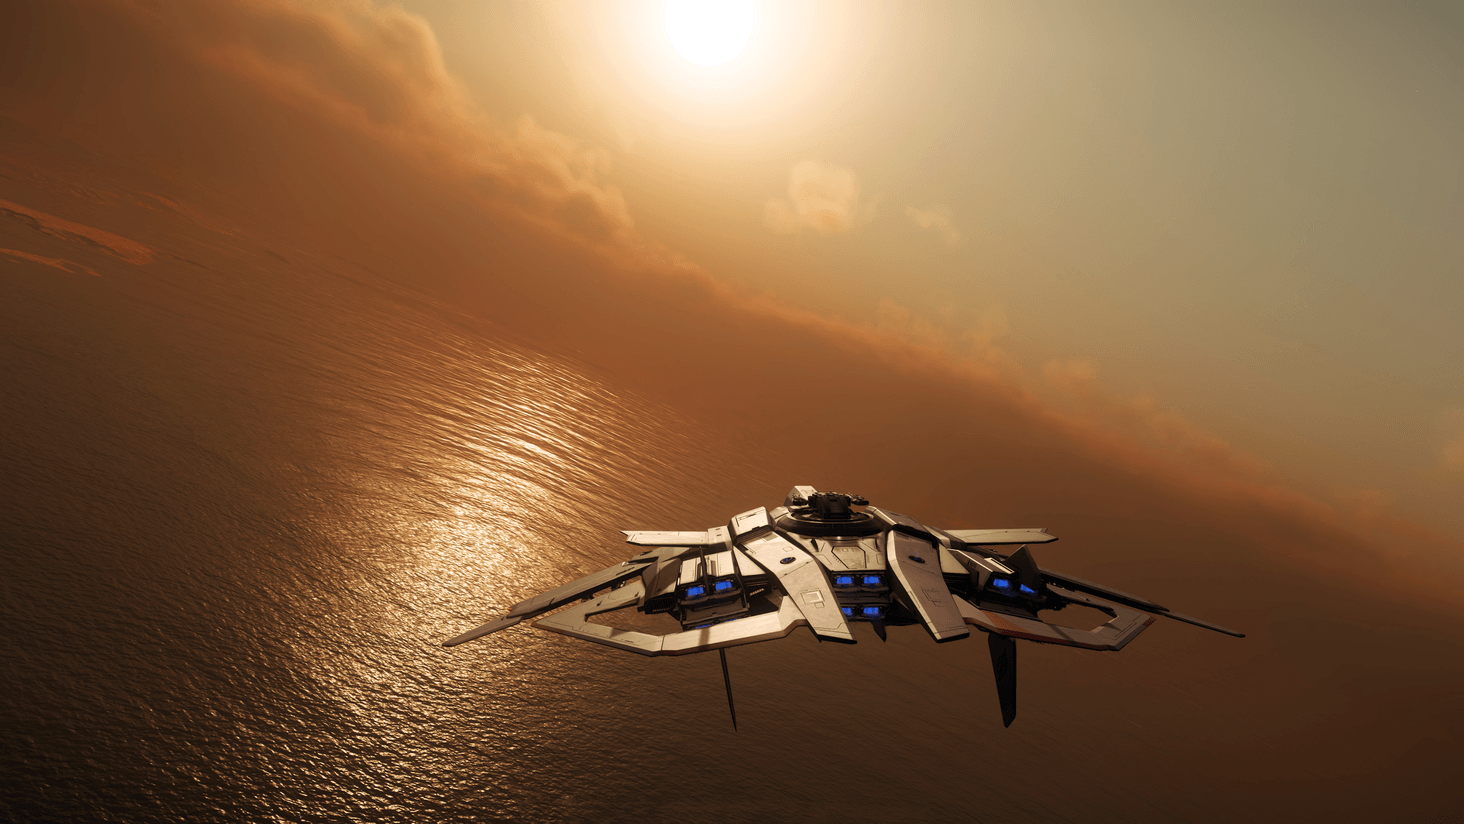 Enjoying the sunset in the seat of my F8C over the waters of Hurston after a long day of bounty hunting.